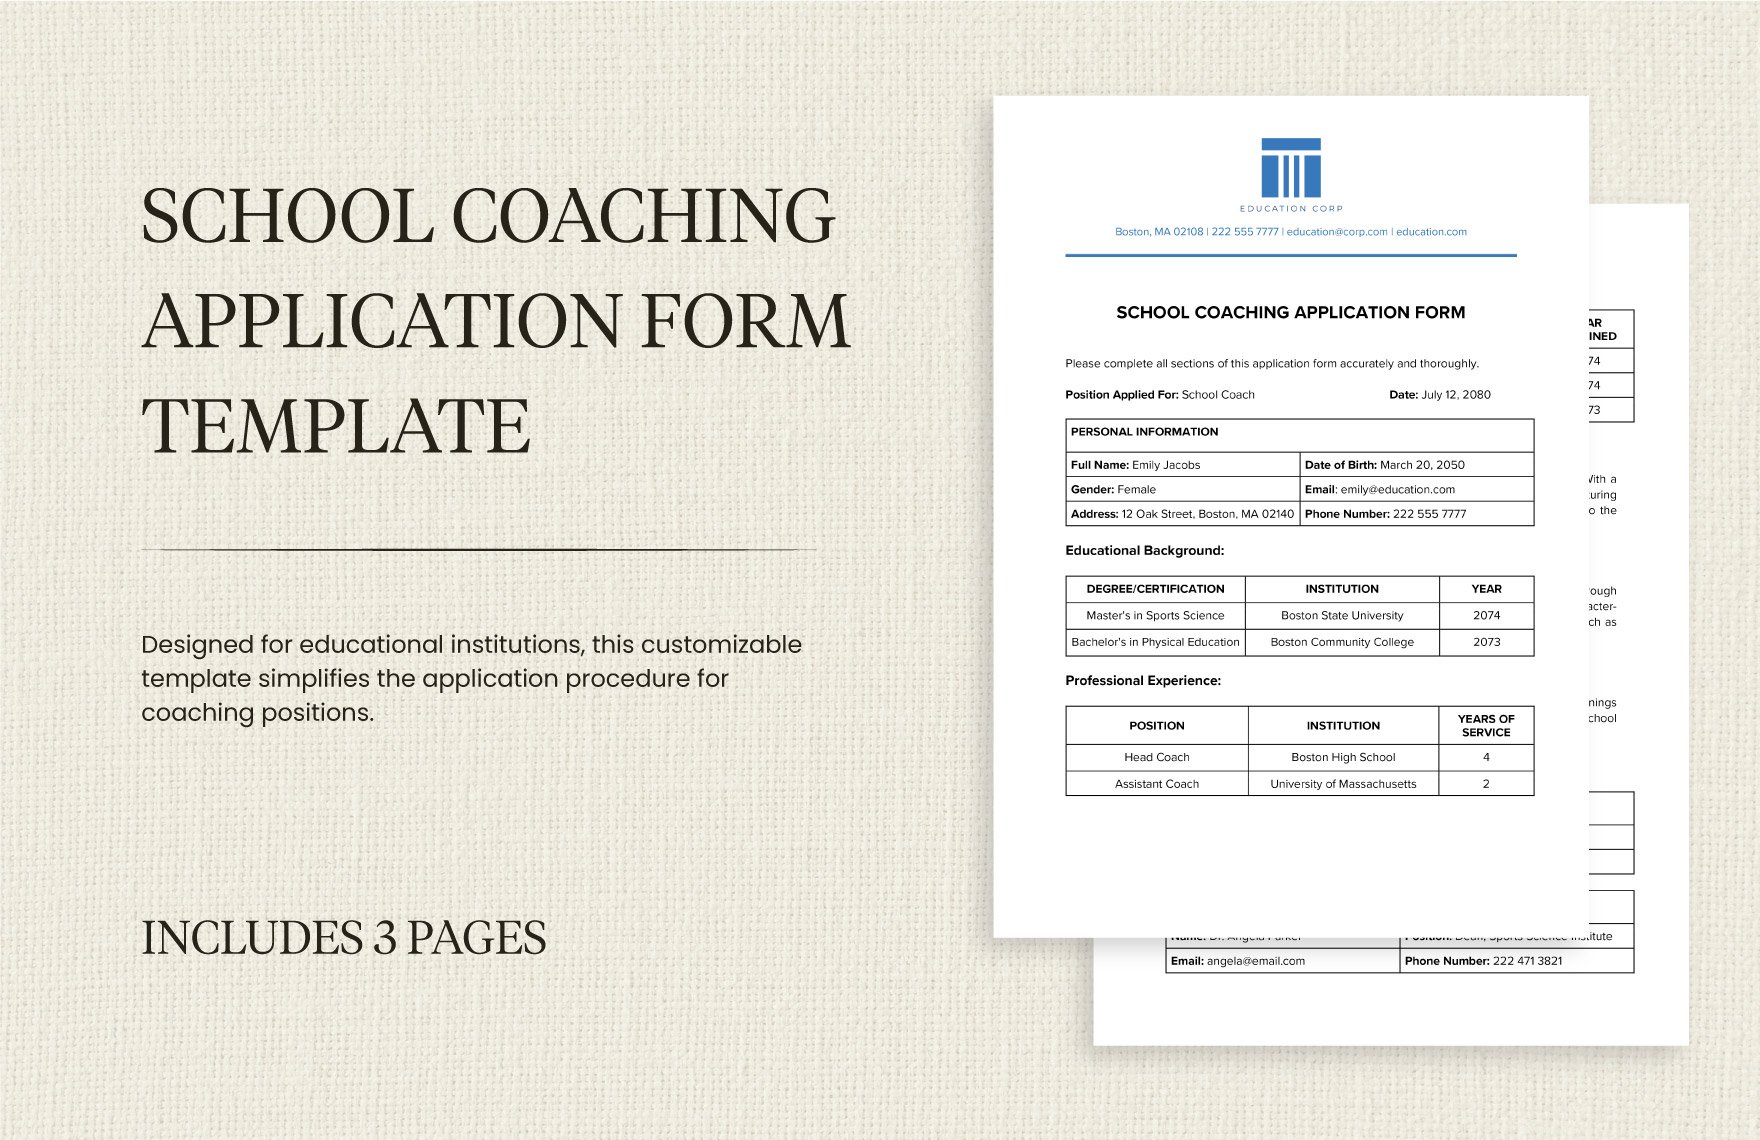 School Coaching Application Form Template